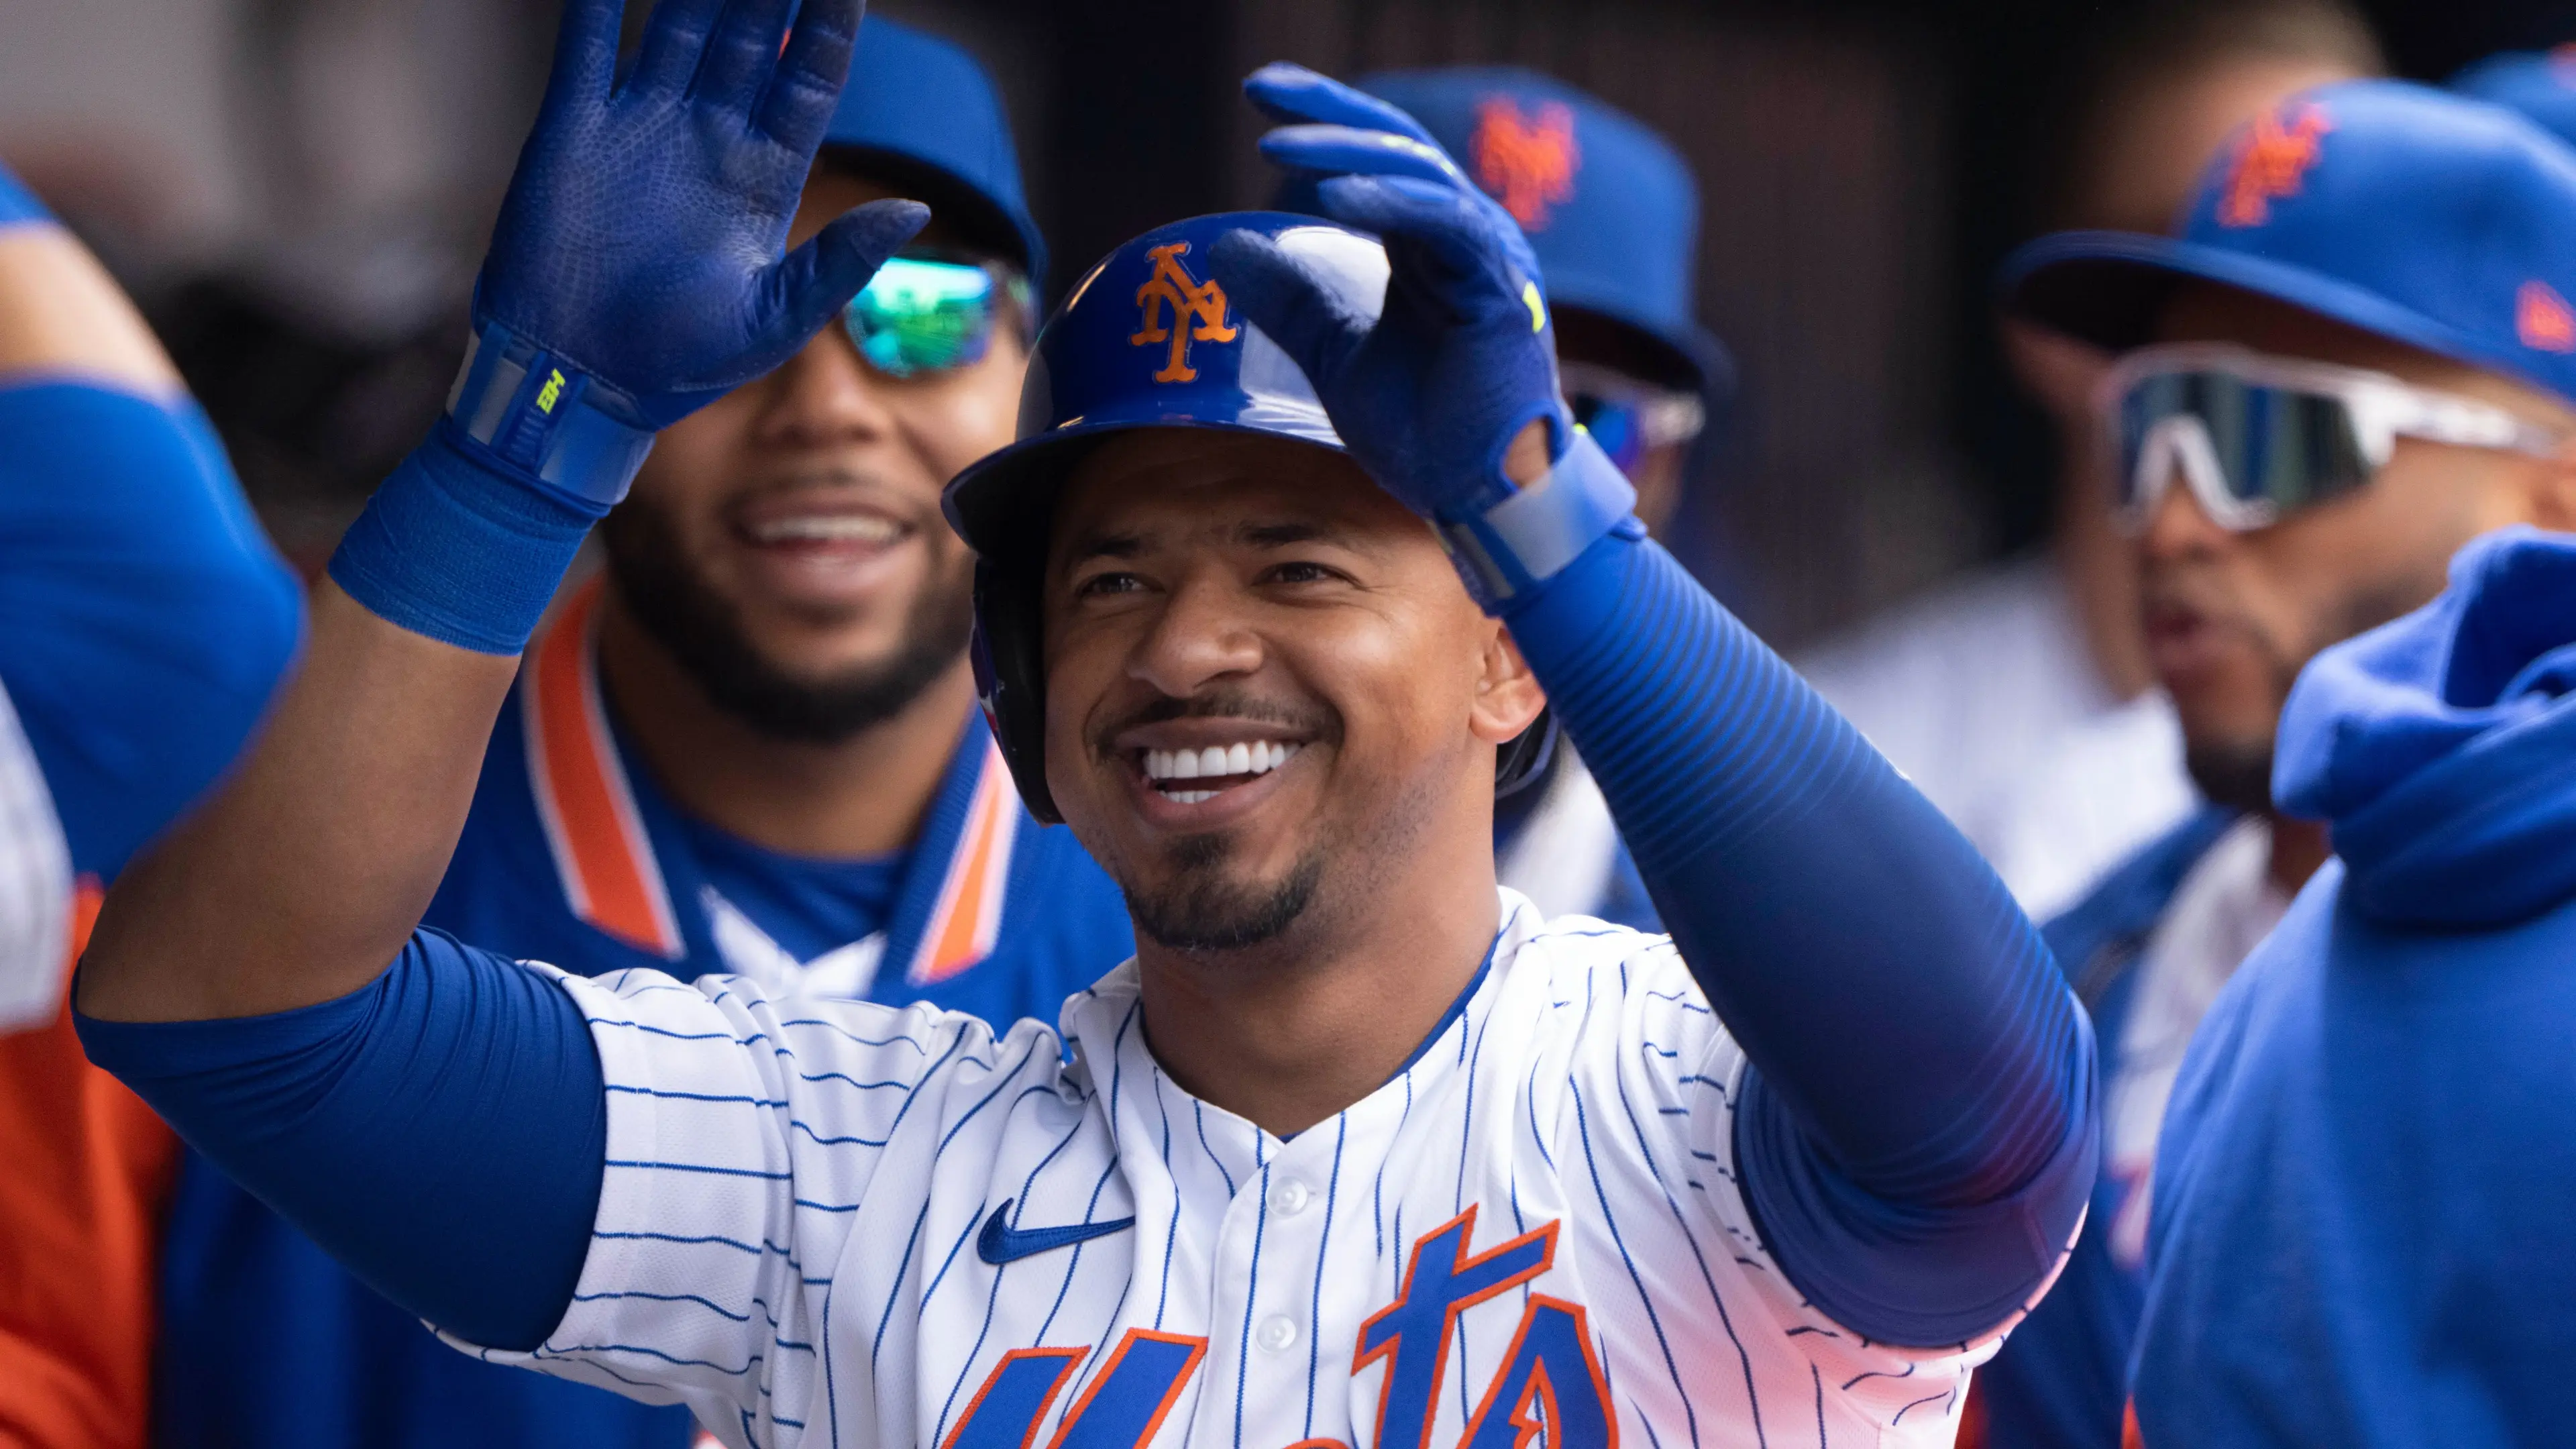 Apr 21, 2022; New York City, New York, USA; Teammates congratulate New York Mets third baseman Eduardo Escobar (10) for hitting a home run against the San Francisco Giants during the second inning at Citi Field / Gregory Fisher-USA TODAY Sports